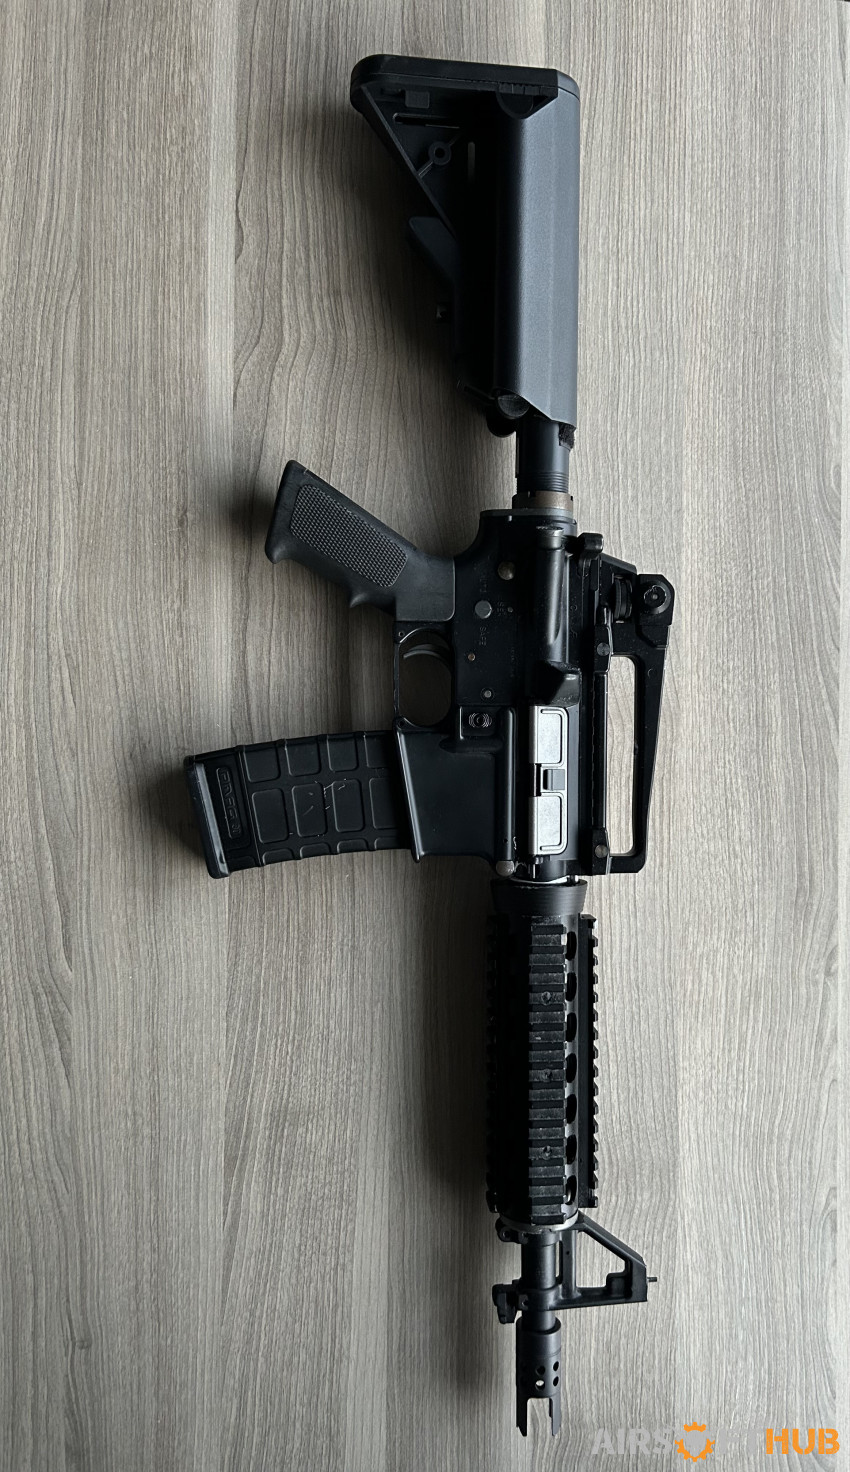 Western Arms M4 - Used airsoft equipment